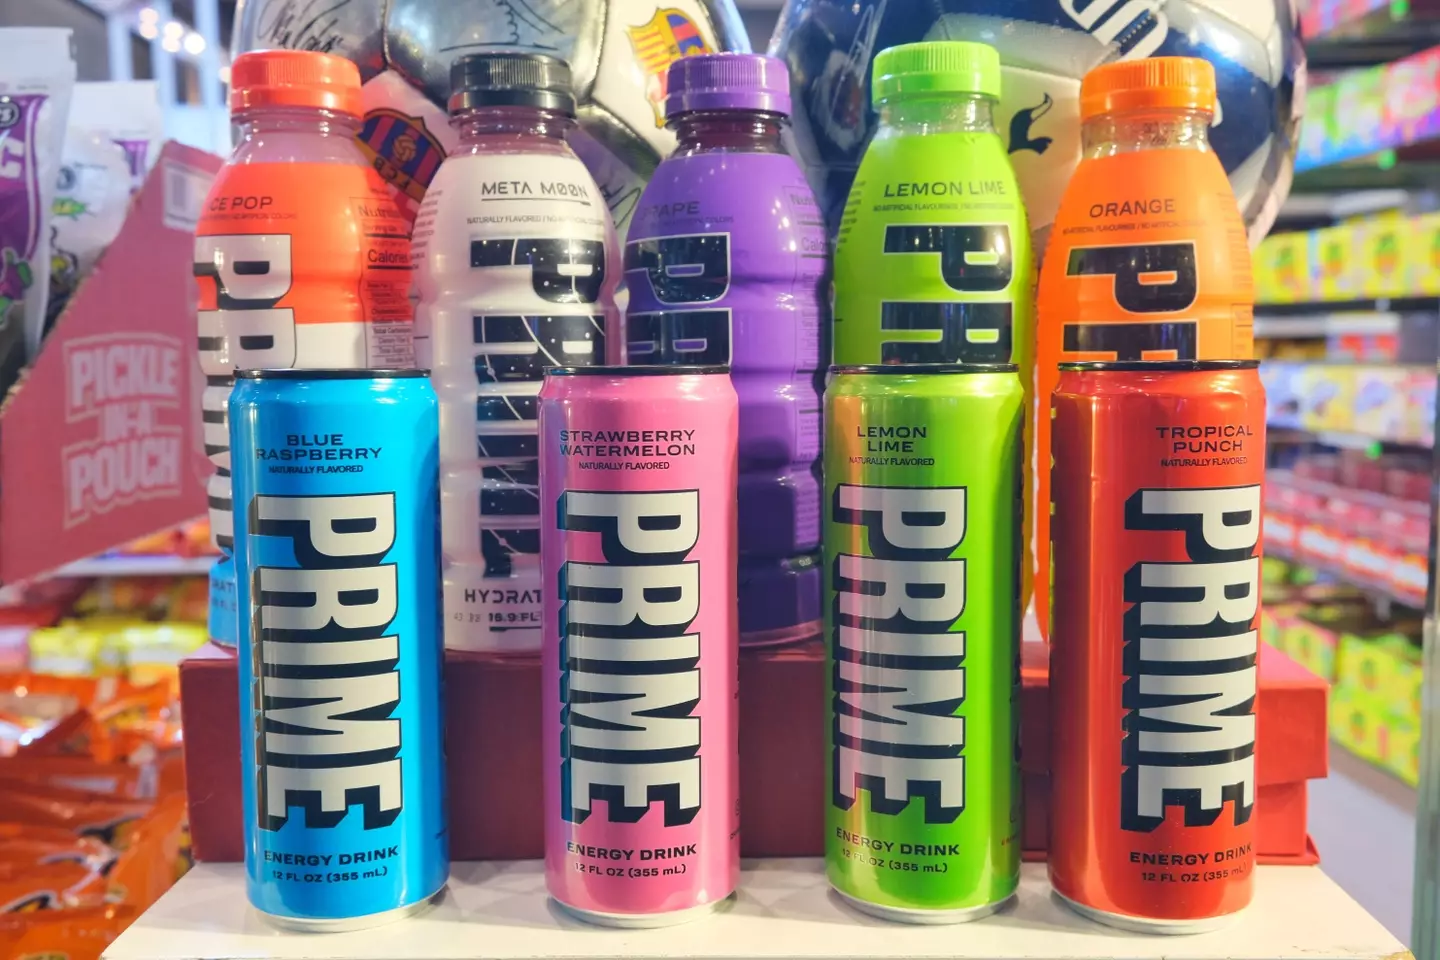 Prime energy drinks are particularly popular among children.